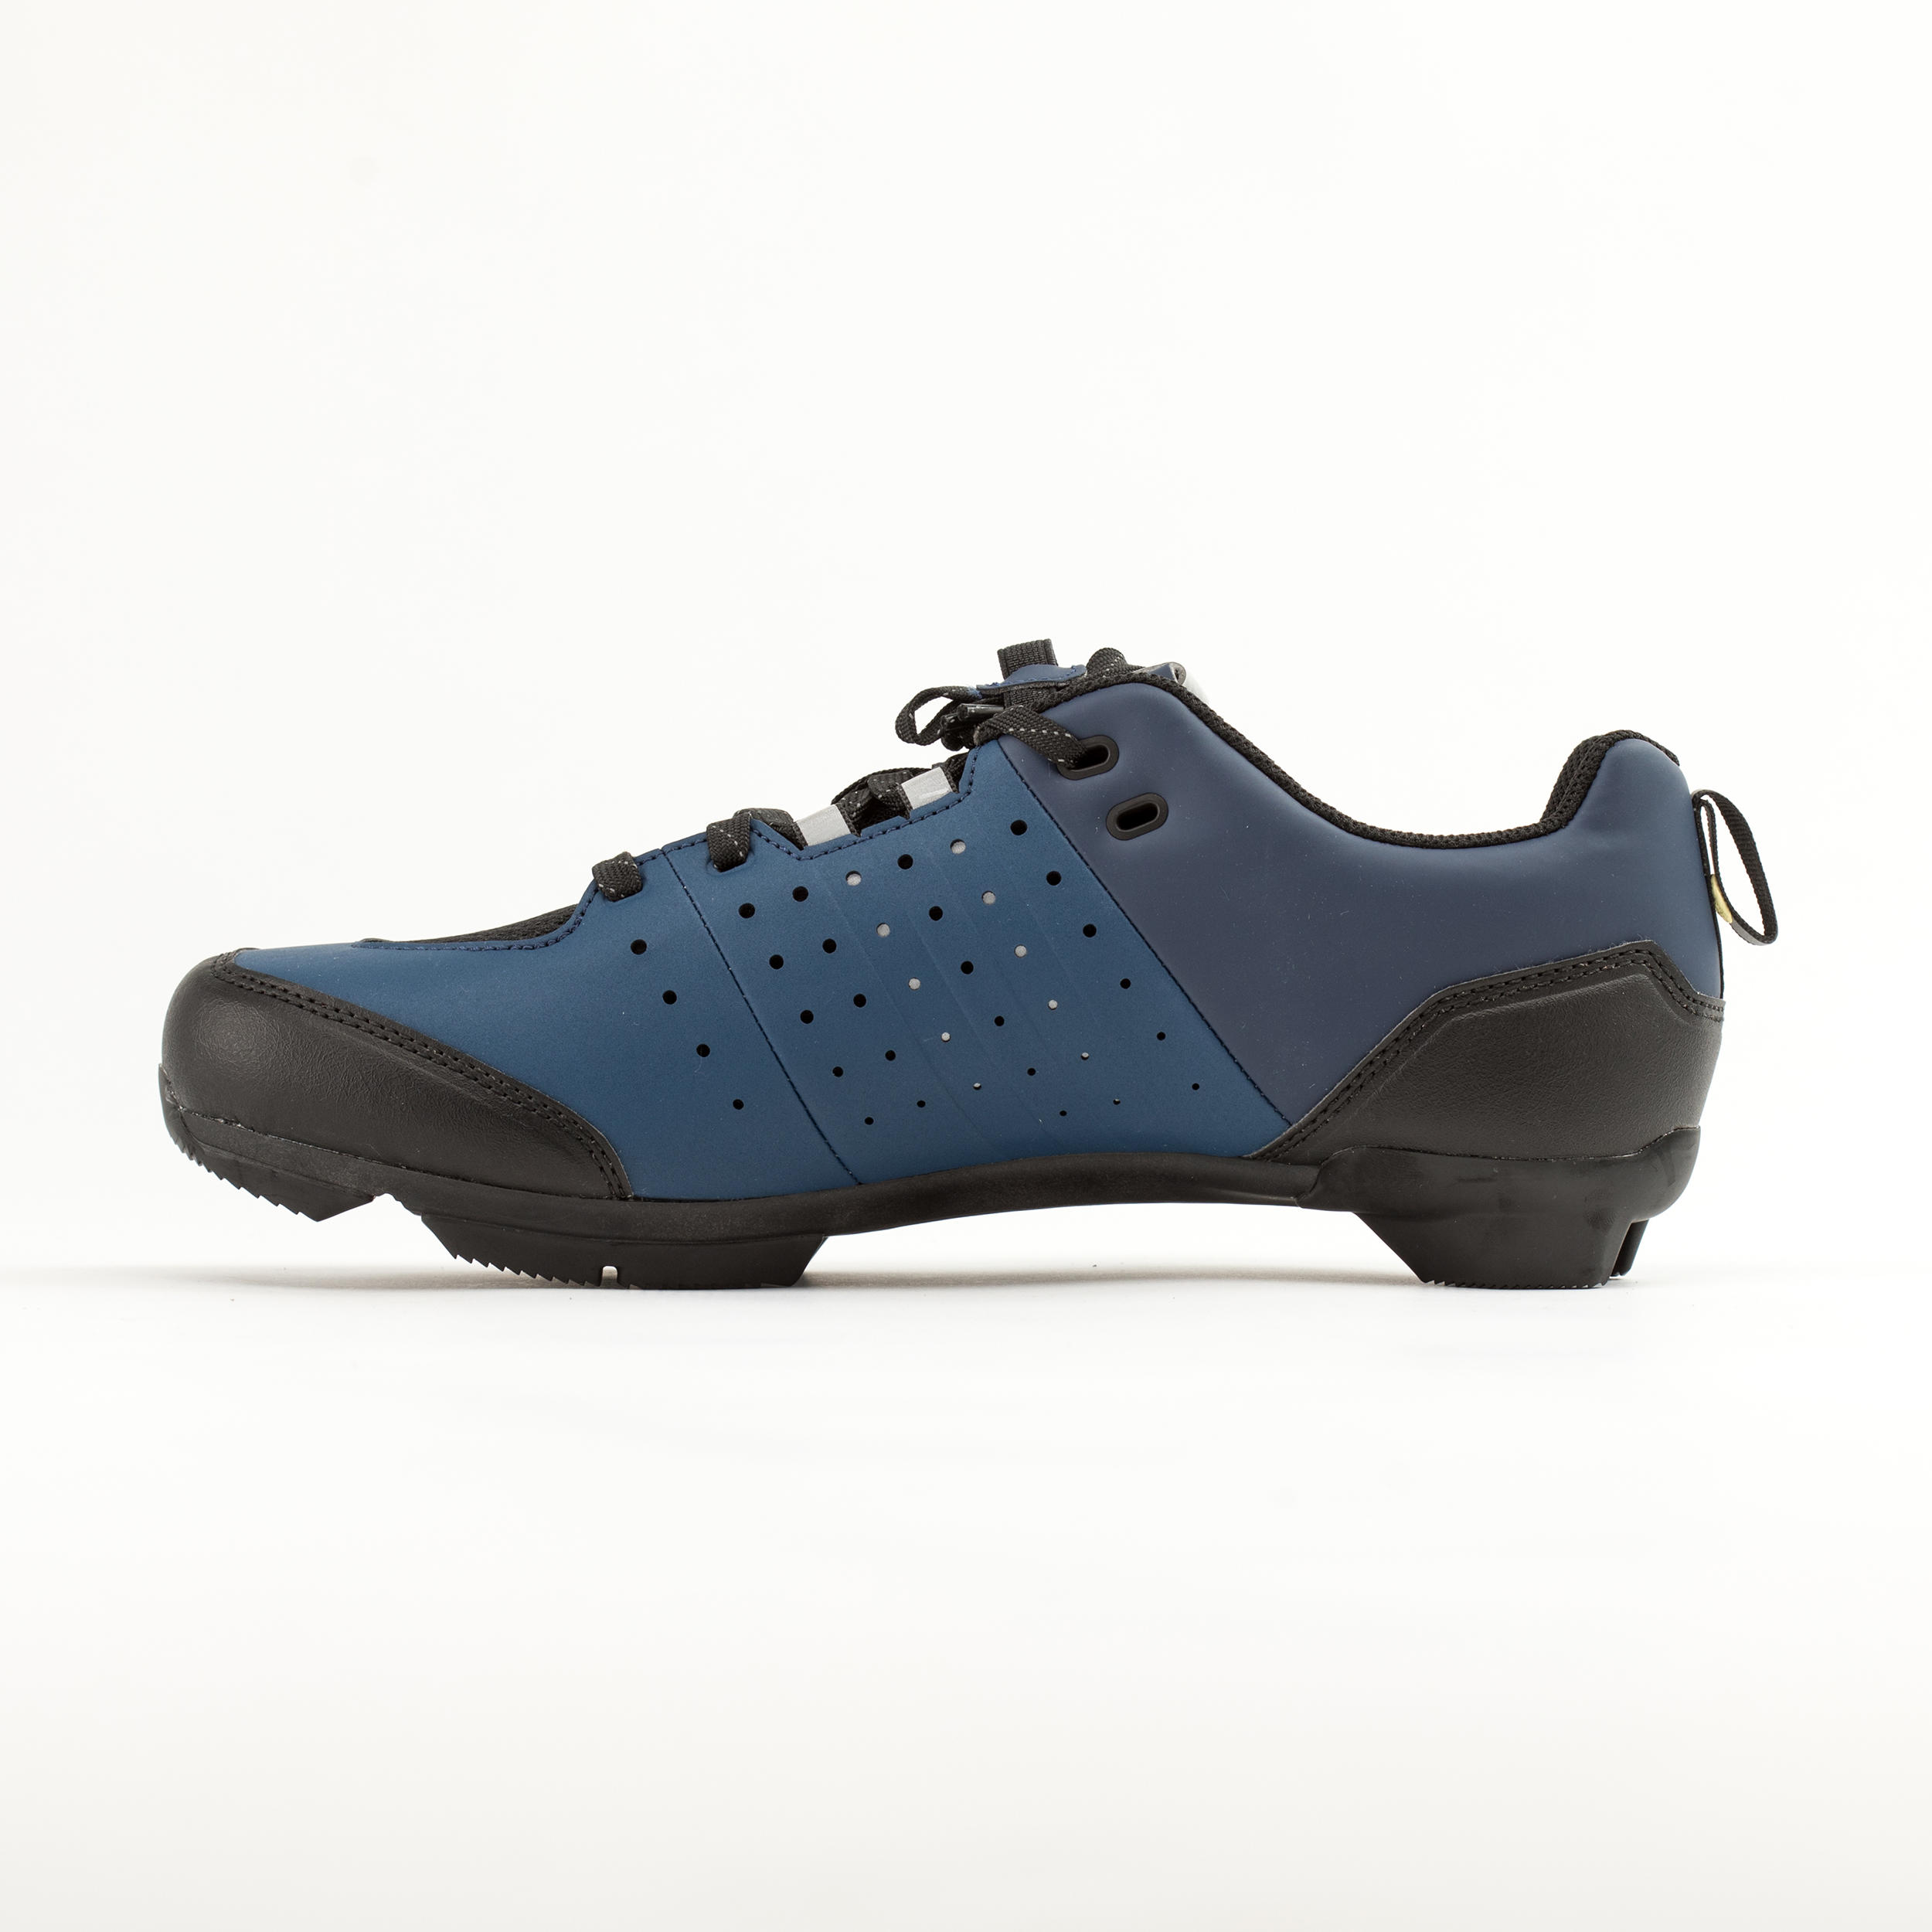 Road and Gravel Cycling Lace-Up SPD Shoes GRVL 500 - Blue / Navy 4/7